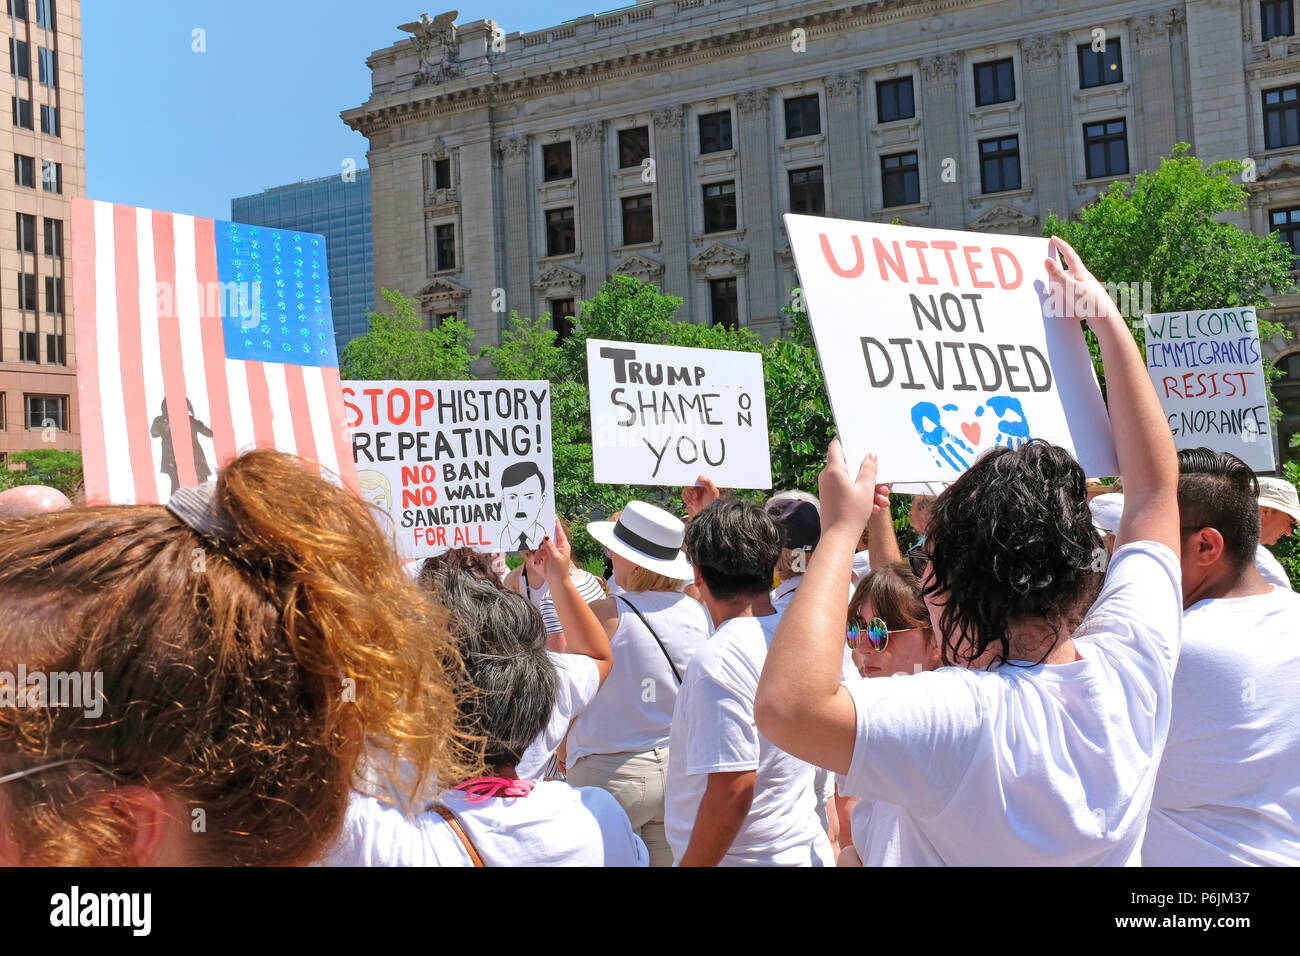 Cleveland, USA.  30th June, 2018.  Protesters hold signs in Cleveland Public Square opposing Trump administration policies separating children from parents at the border. Credit: Mark Kanning/Alamy Live News Stock Photo